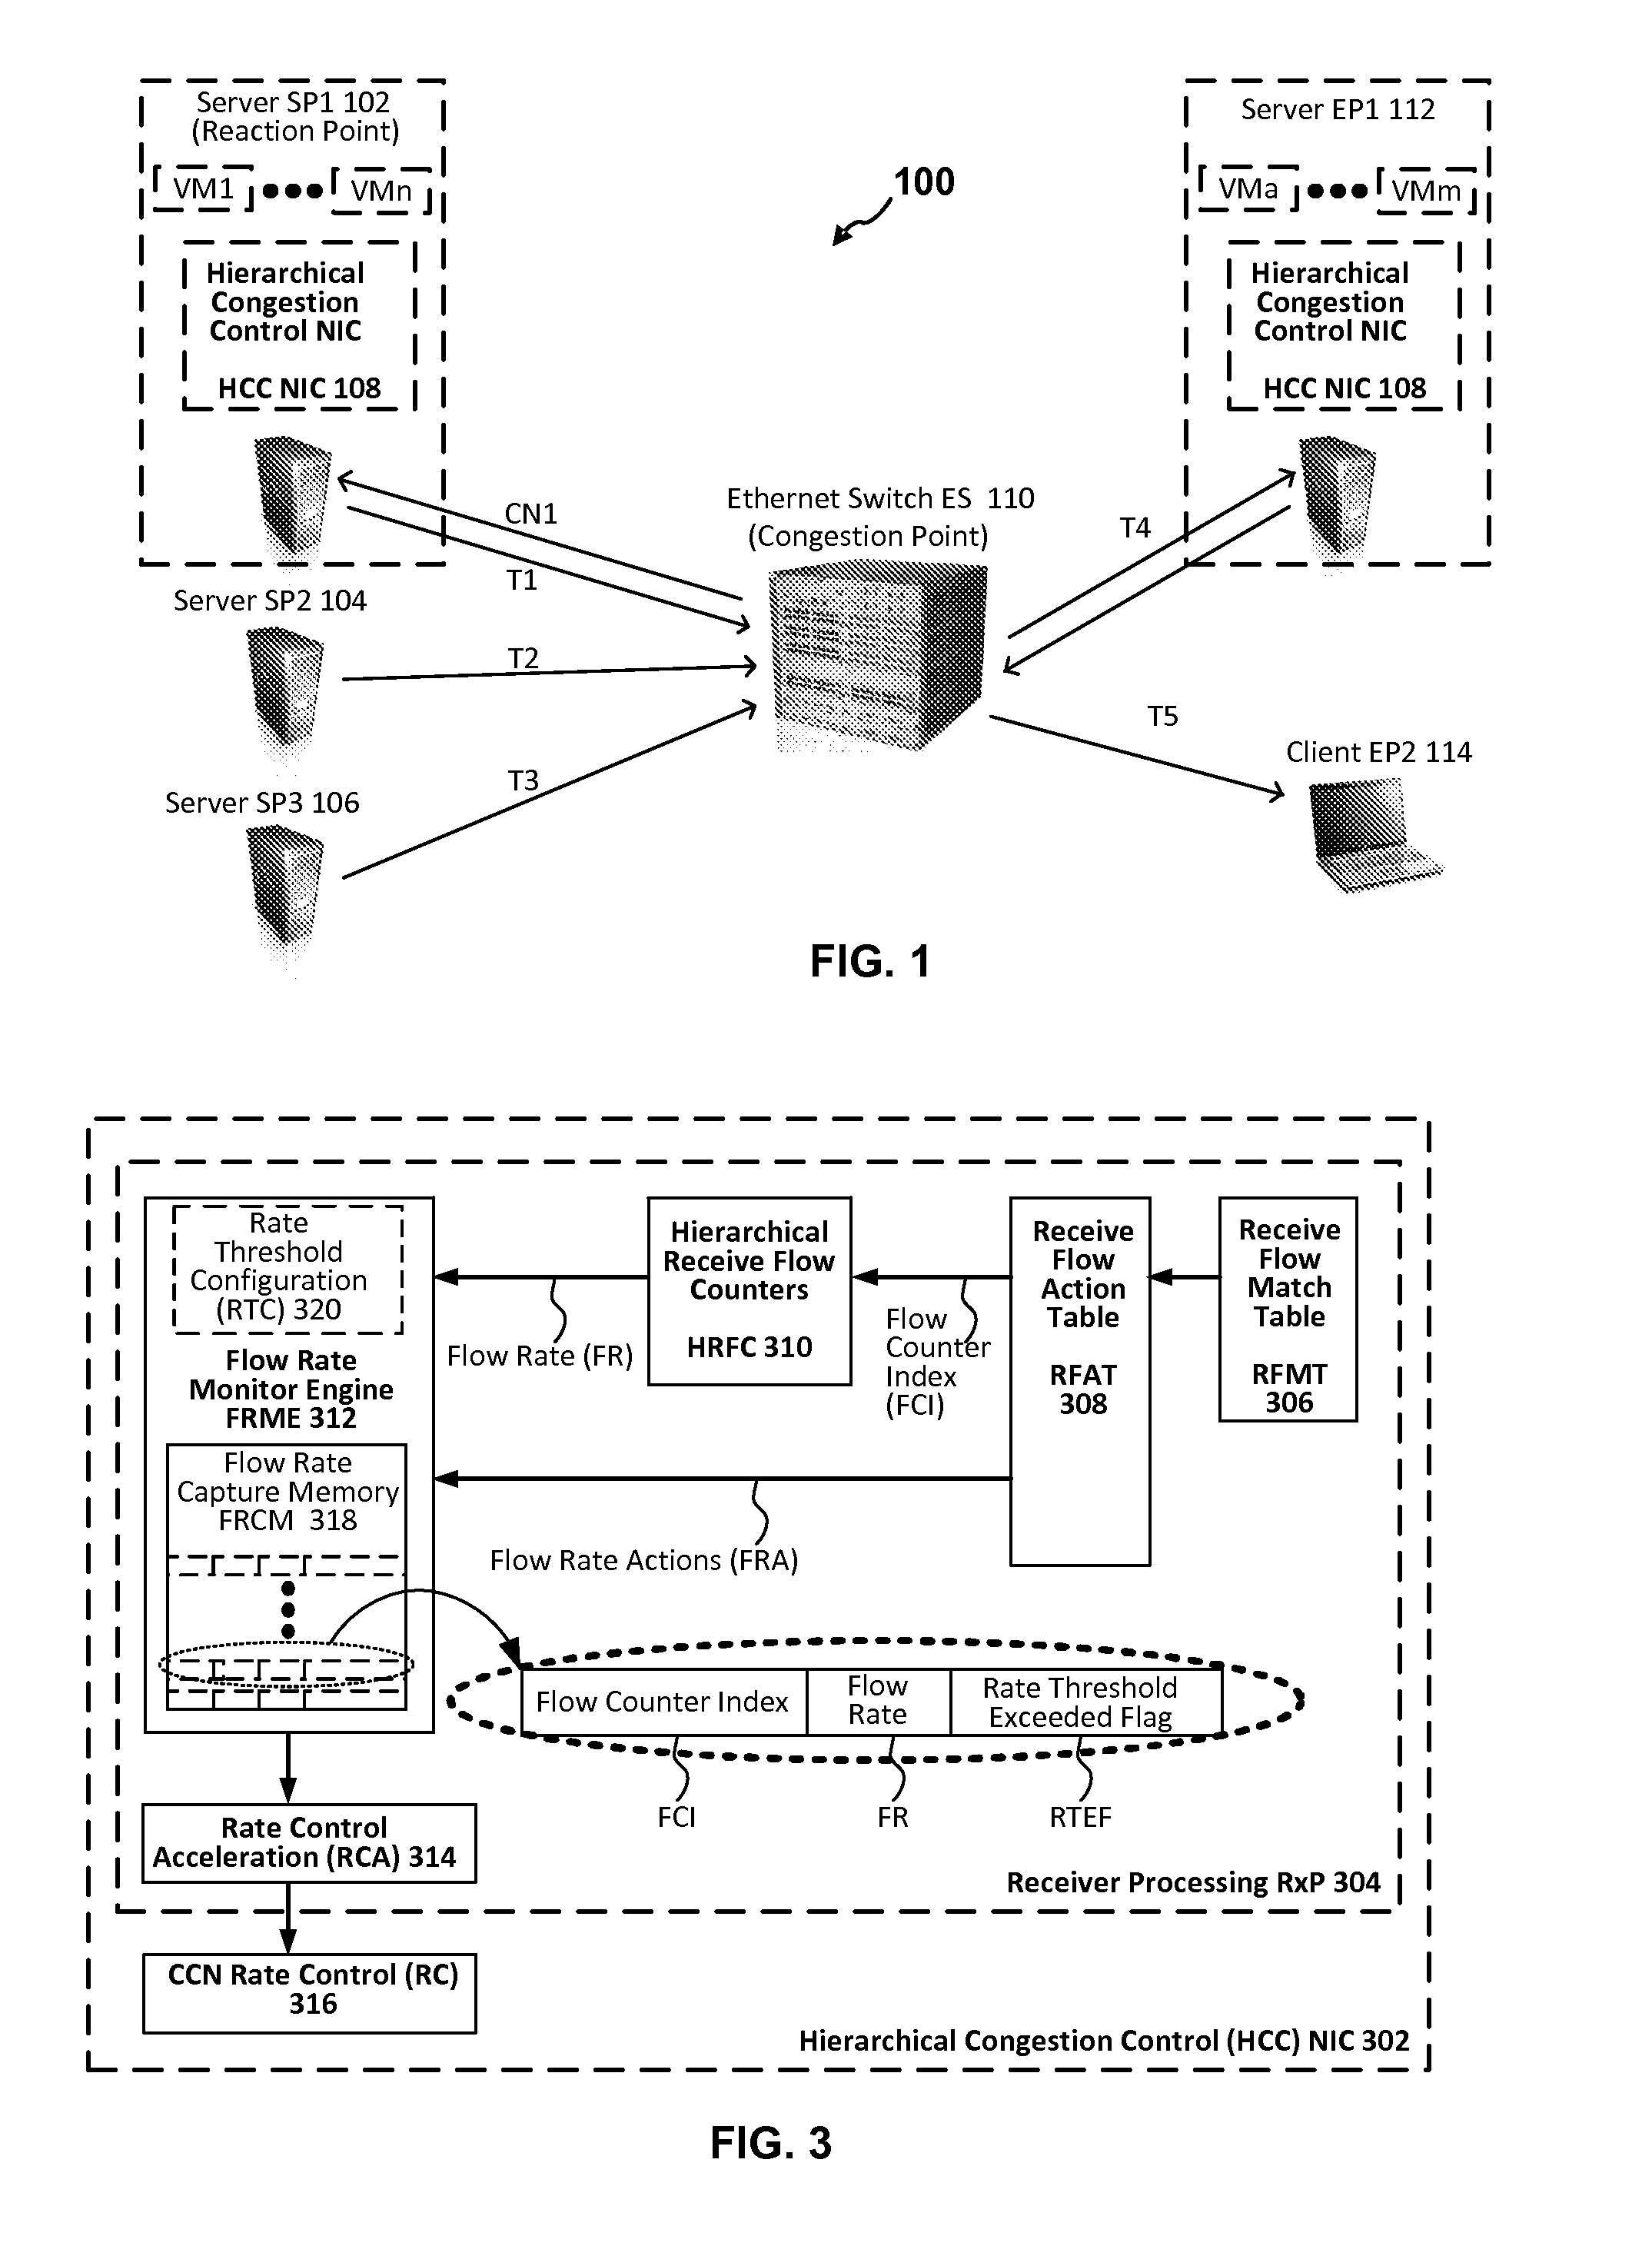 Hierarchical congestion control with congested flow identification hardware